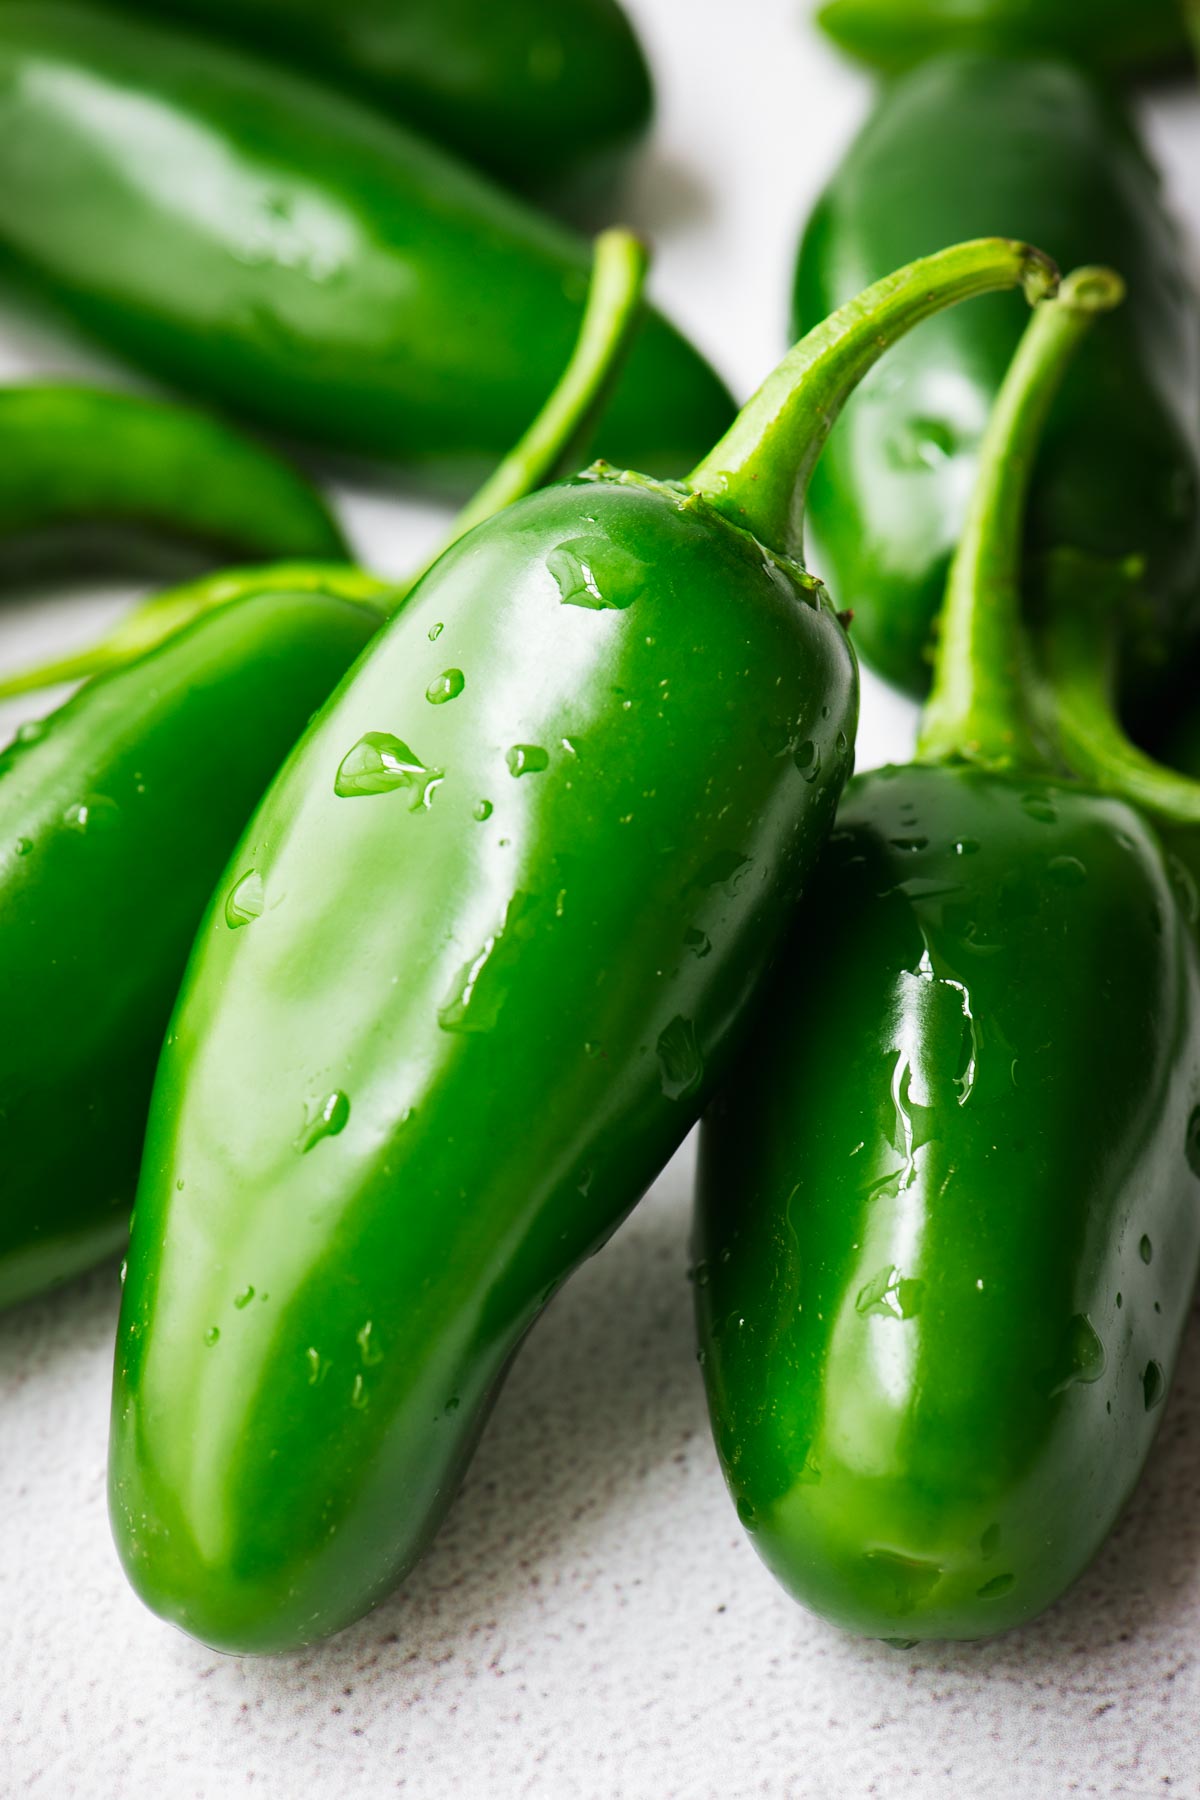 A close-up view of green jalapeño chillies with water droplets.